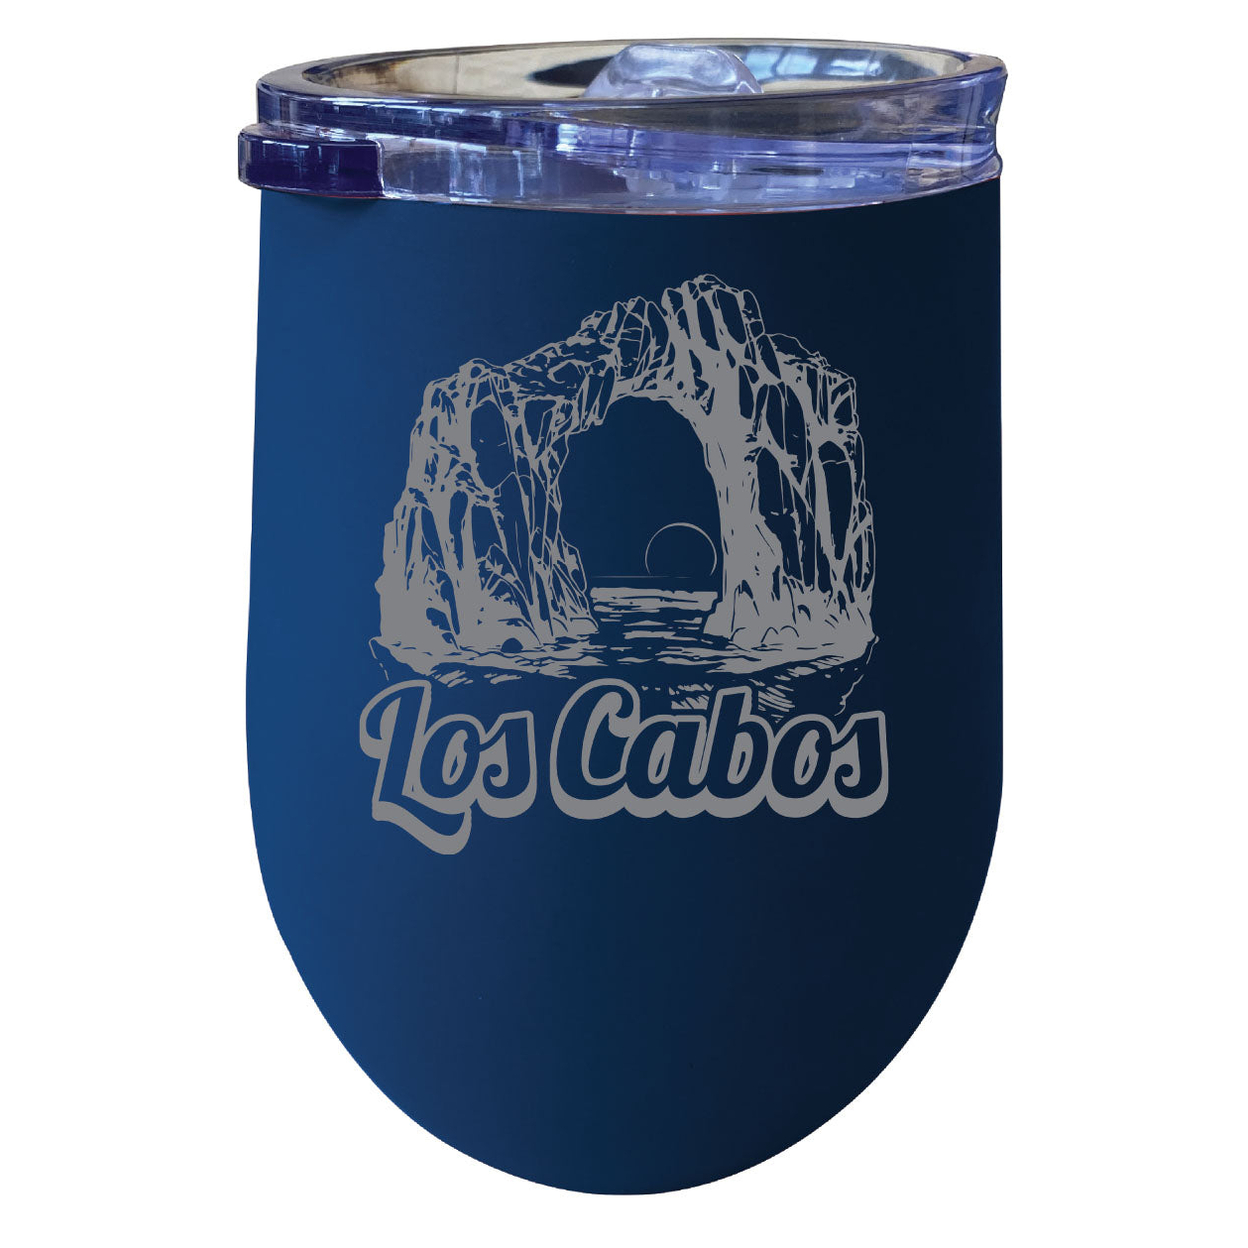 Los Cabos Mexico Souvenir 12 Oz Engraved Insulated Wine Stainless Steel Tumbler - Navy,,Single Unit